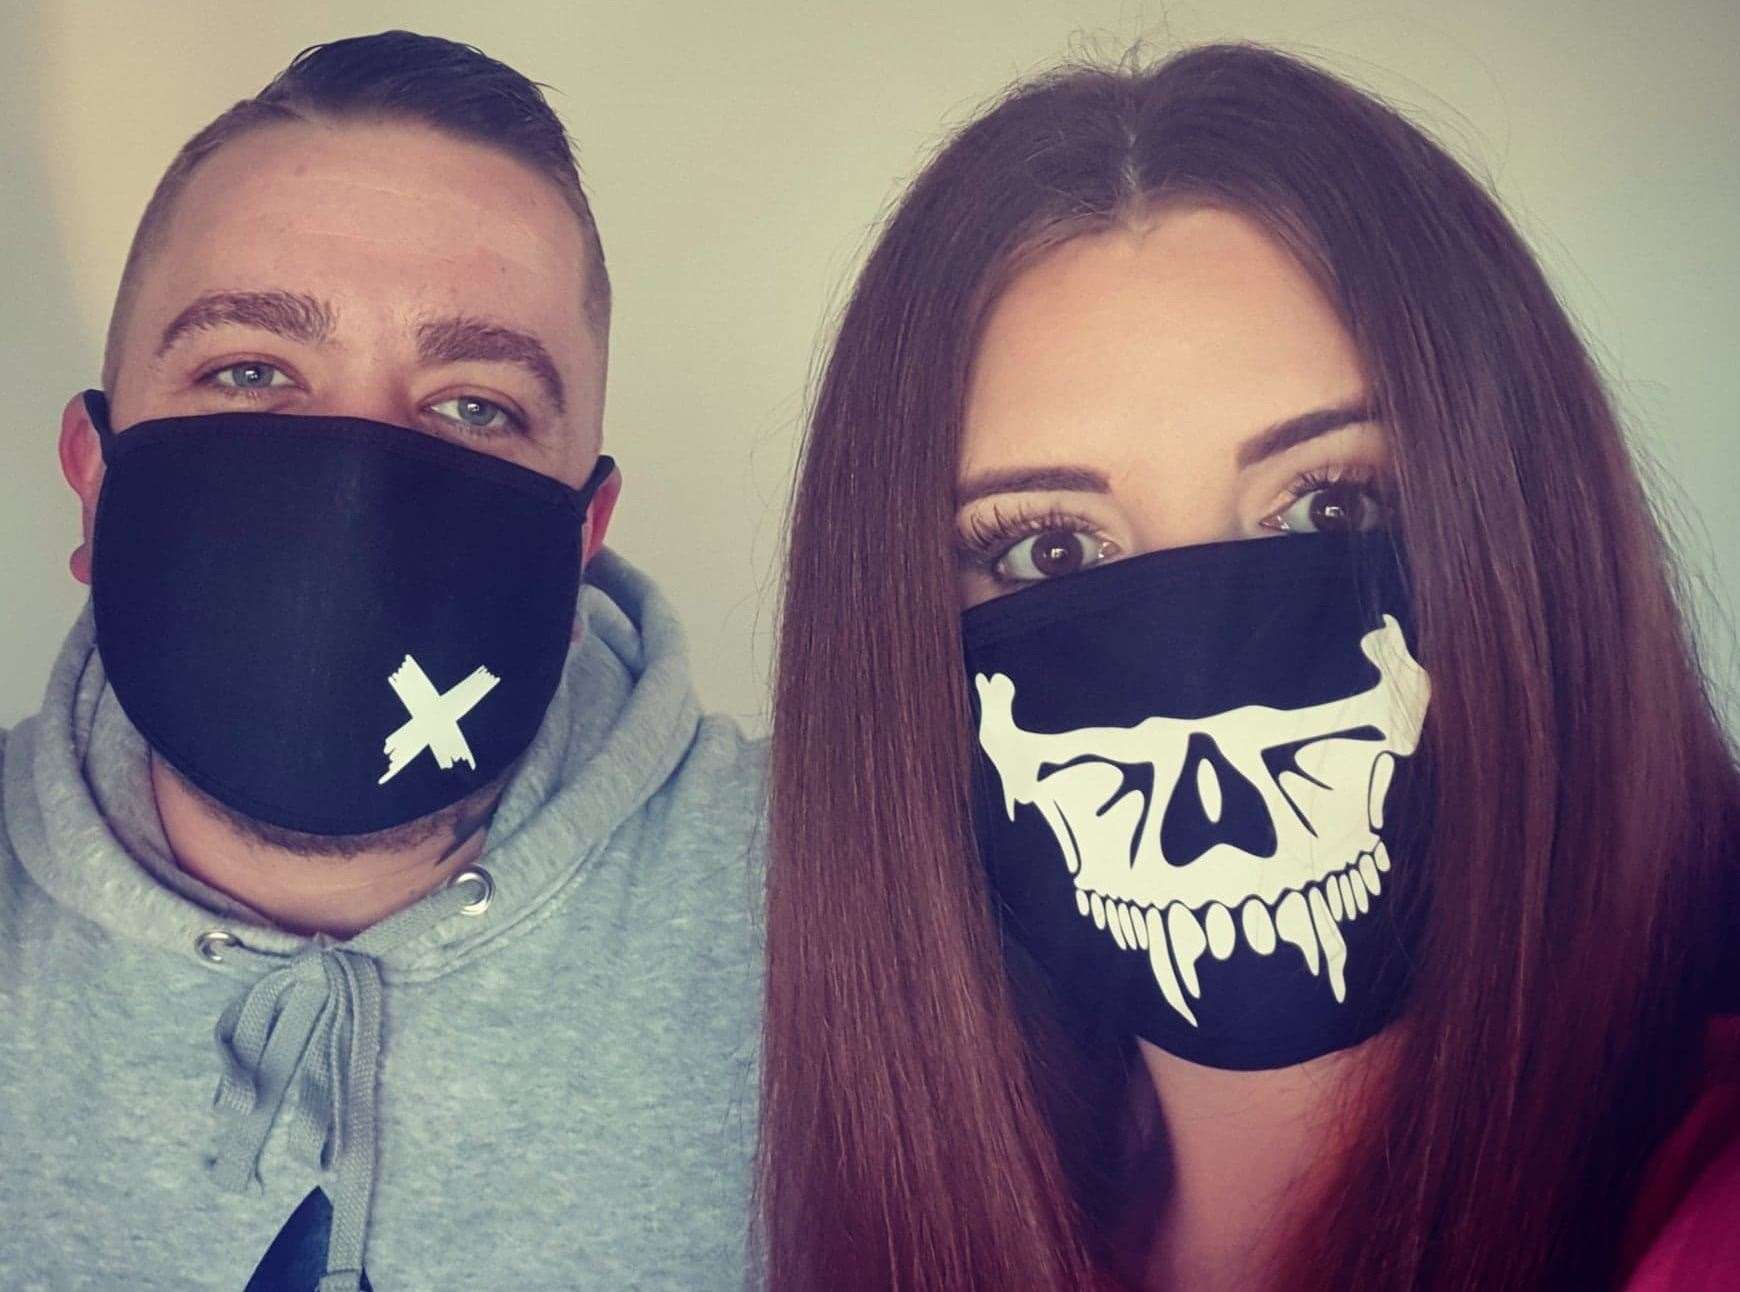 Ben and Jessica's surgical masks. Picture: Jessica Roe